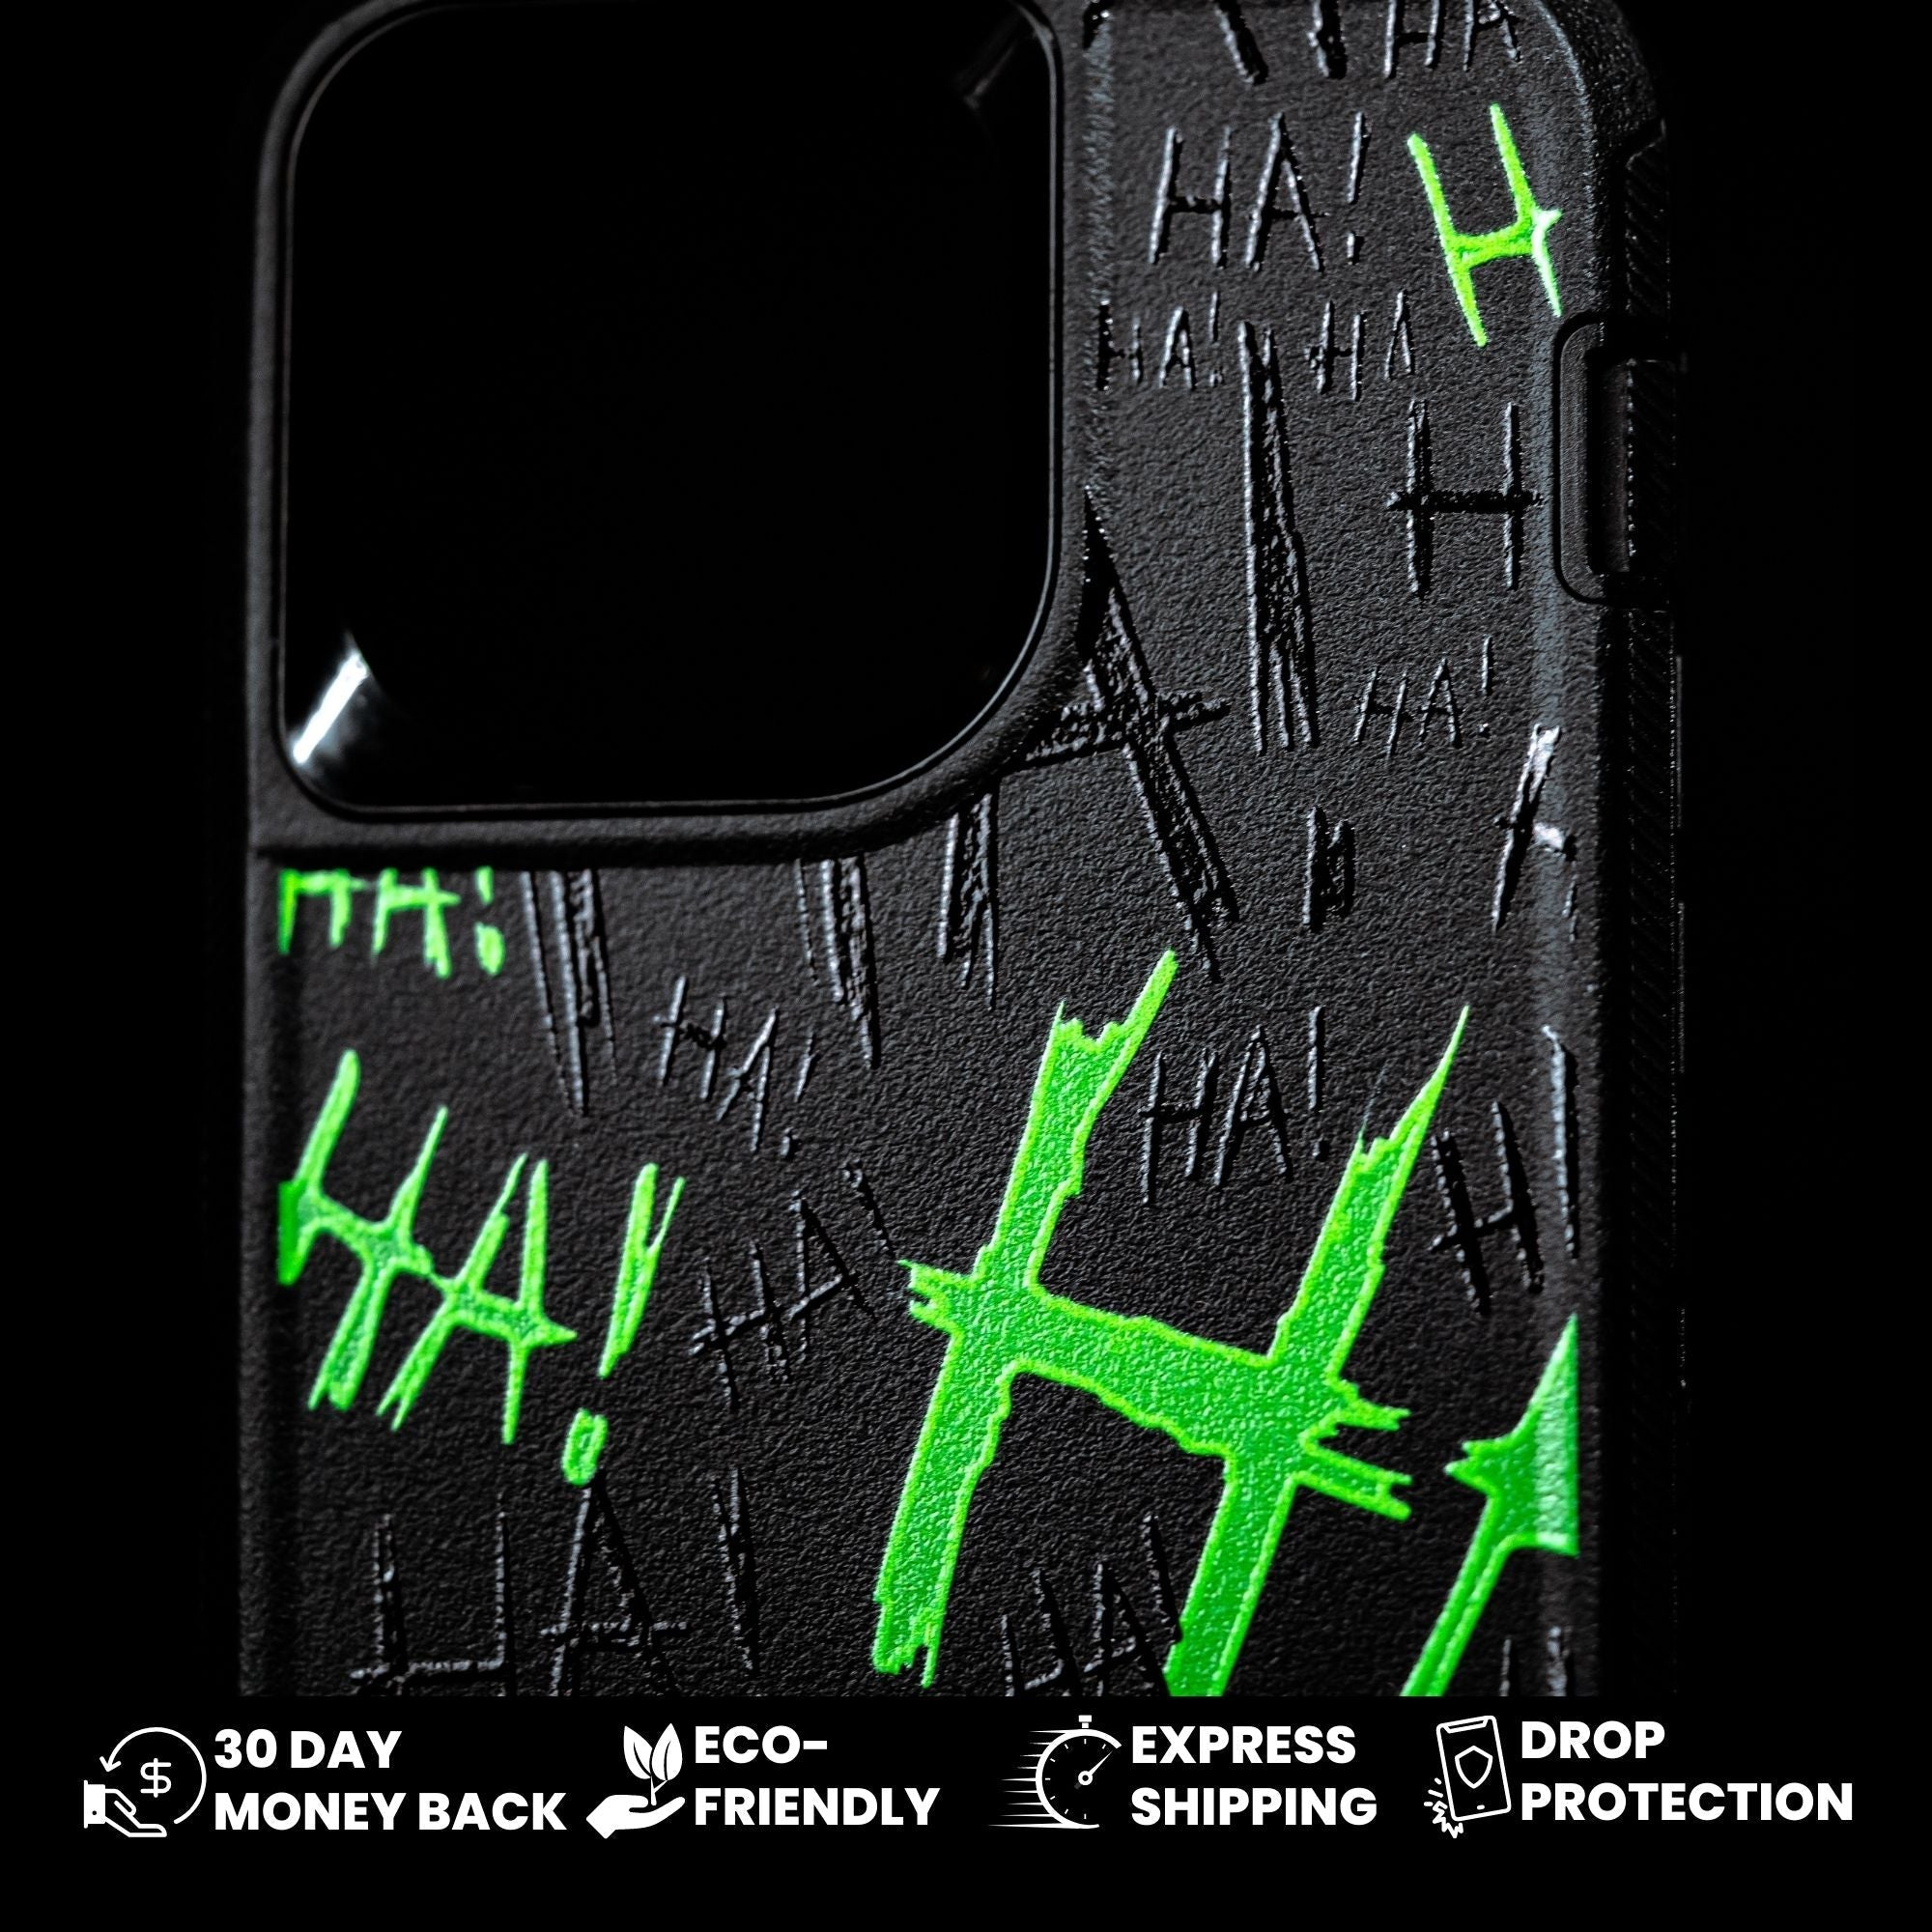 JOK3STER Armored iPhone Case